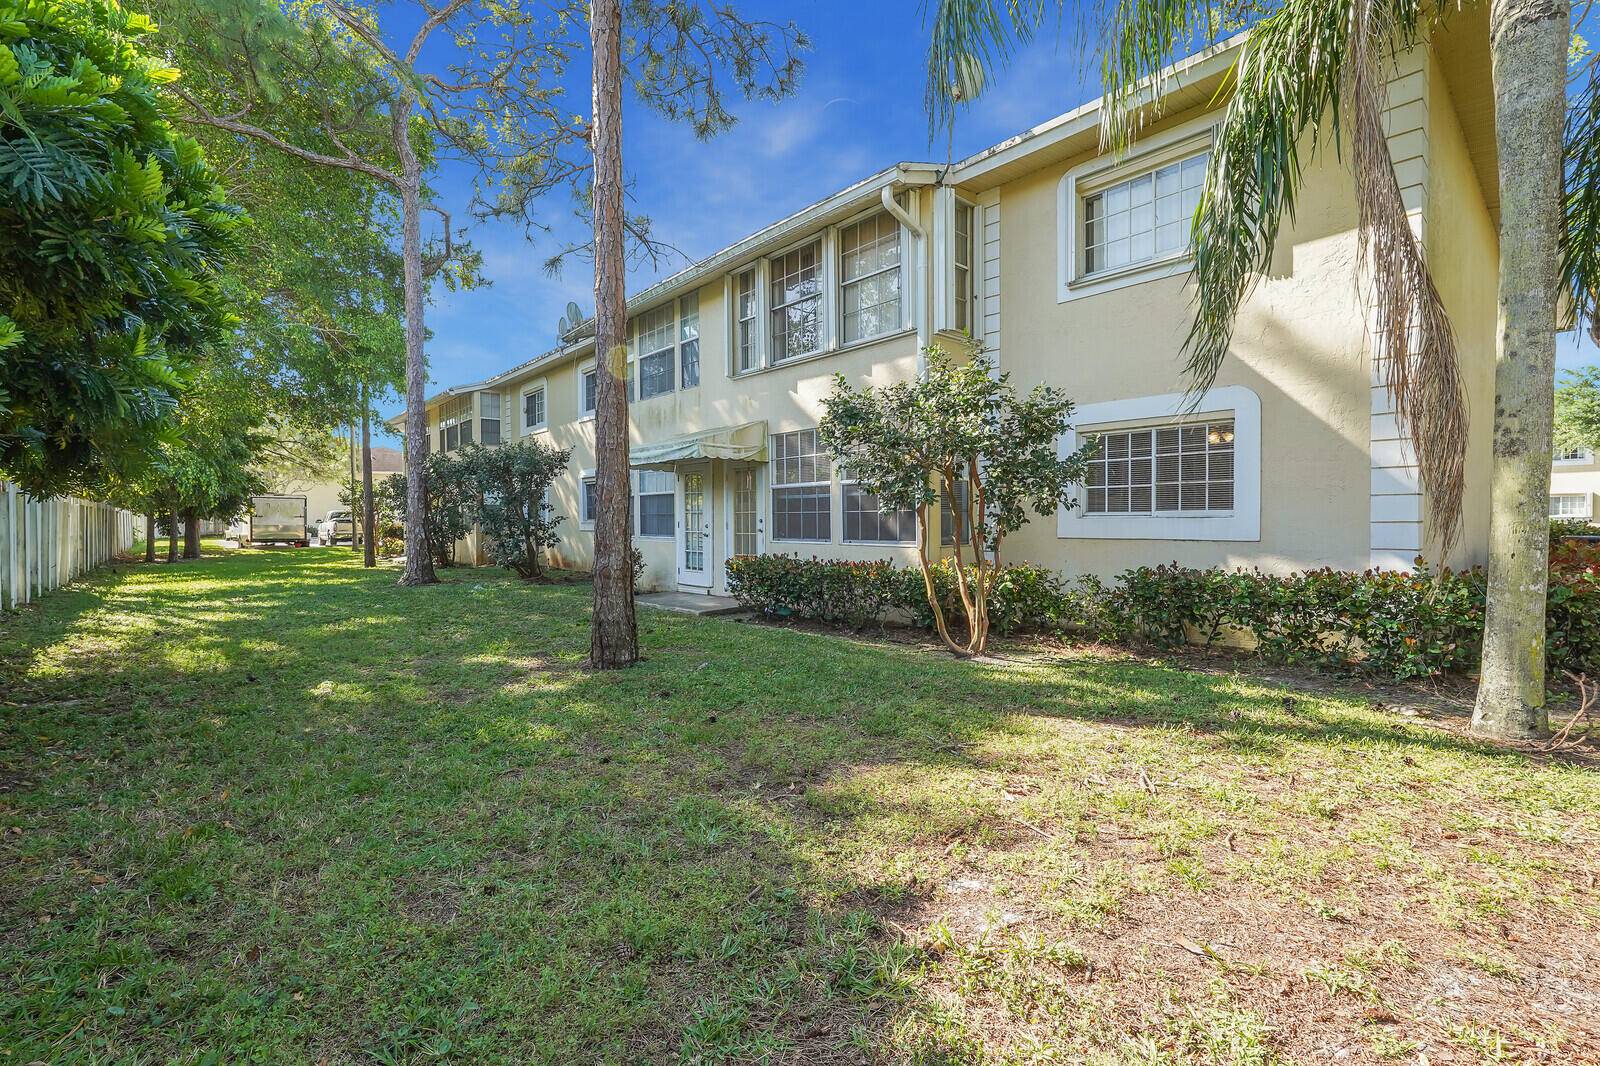 Located in the heart of Royal Palm Beach, this 2 bedroom, 2 bathroom condo offers convenience with its first floor unit and updated features, including sleek white kitchen cabinets contributing ...